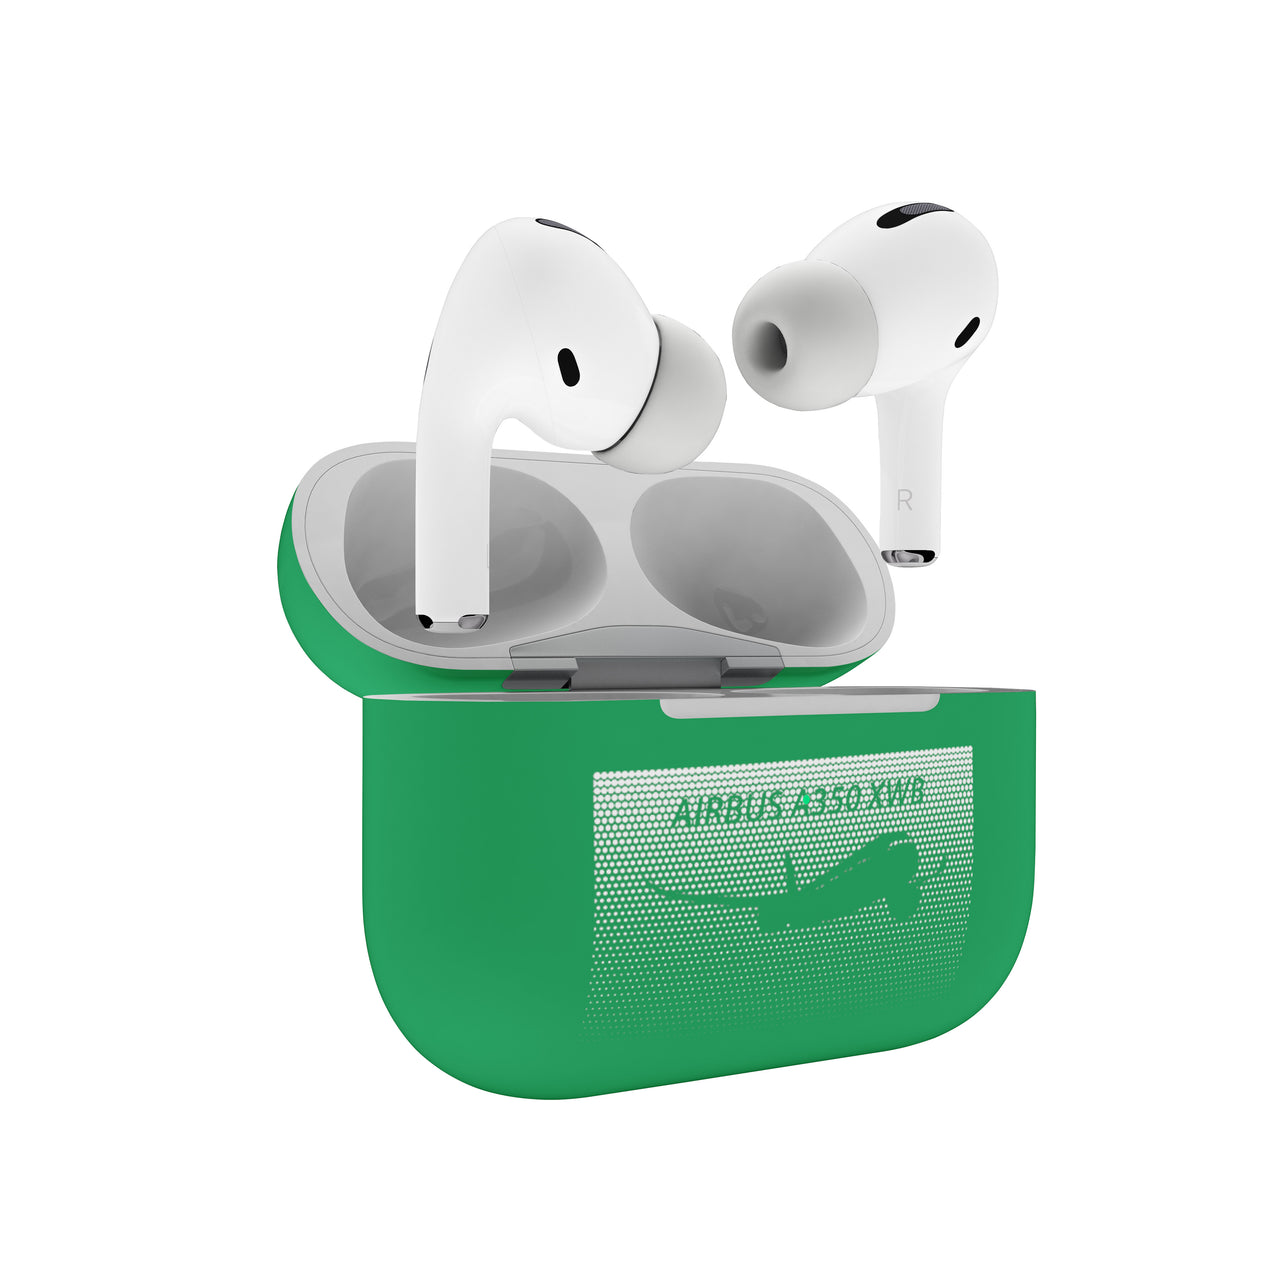 Airbus A350XWB & Dots Designed AirPods "Pro" Cases